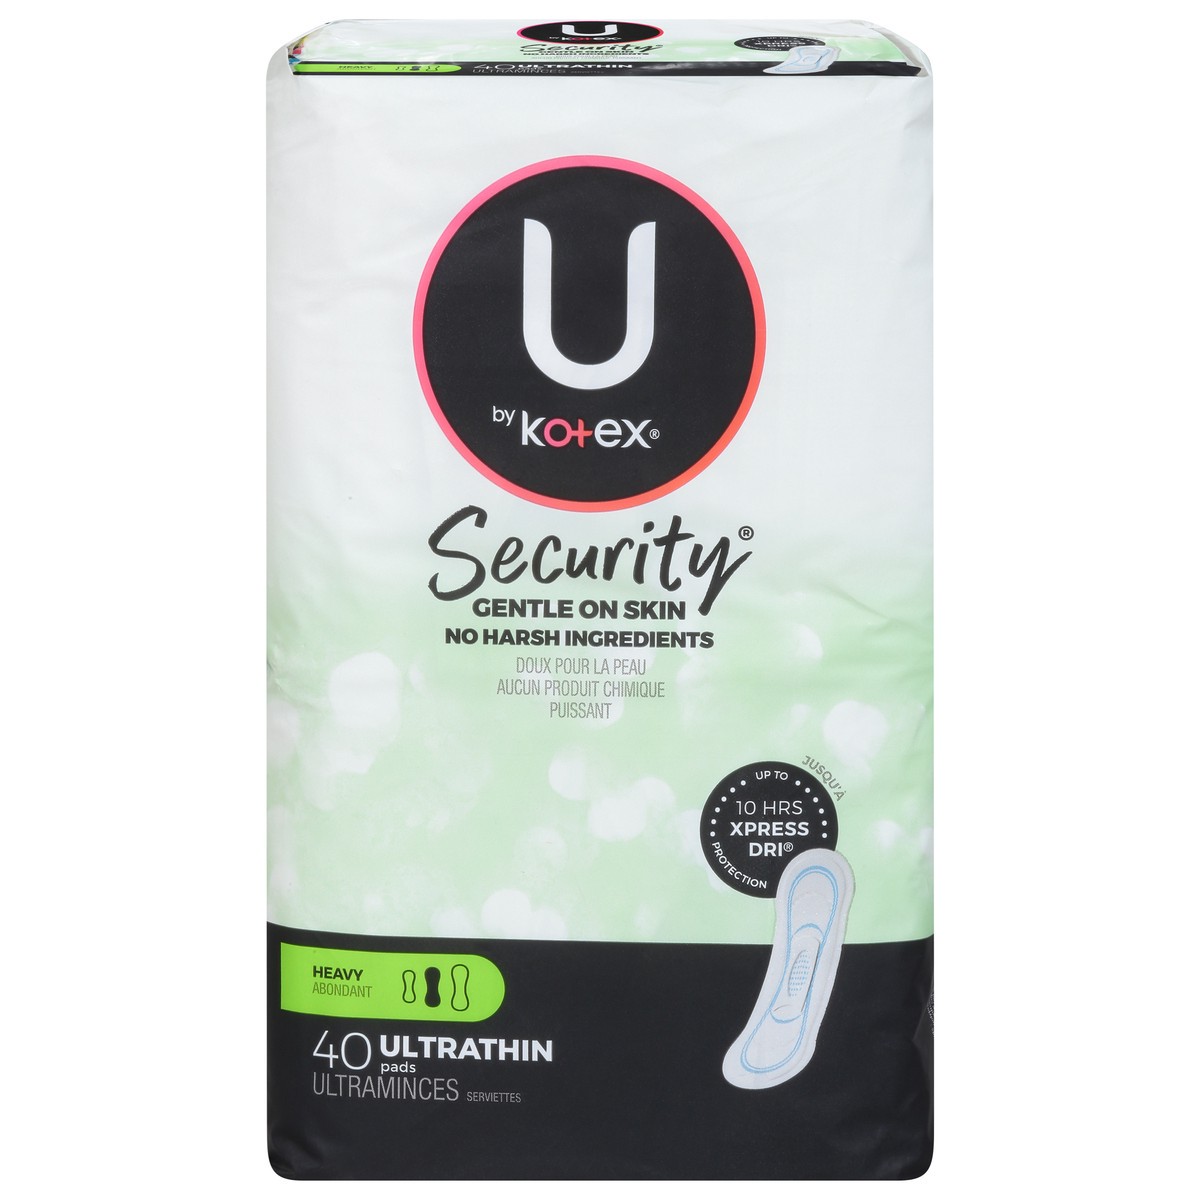 slide 12 of 16, U by Kotex Security Heavy Ultra Thin Pads 40 ea, 40 ct